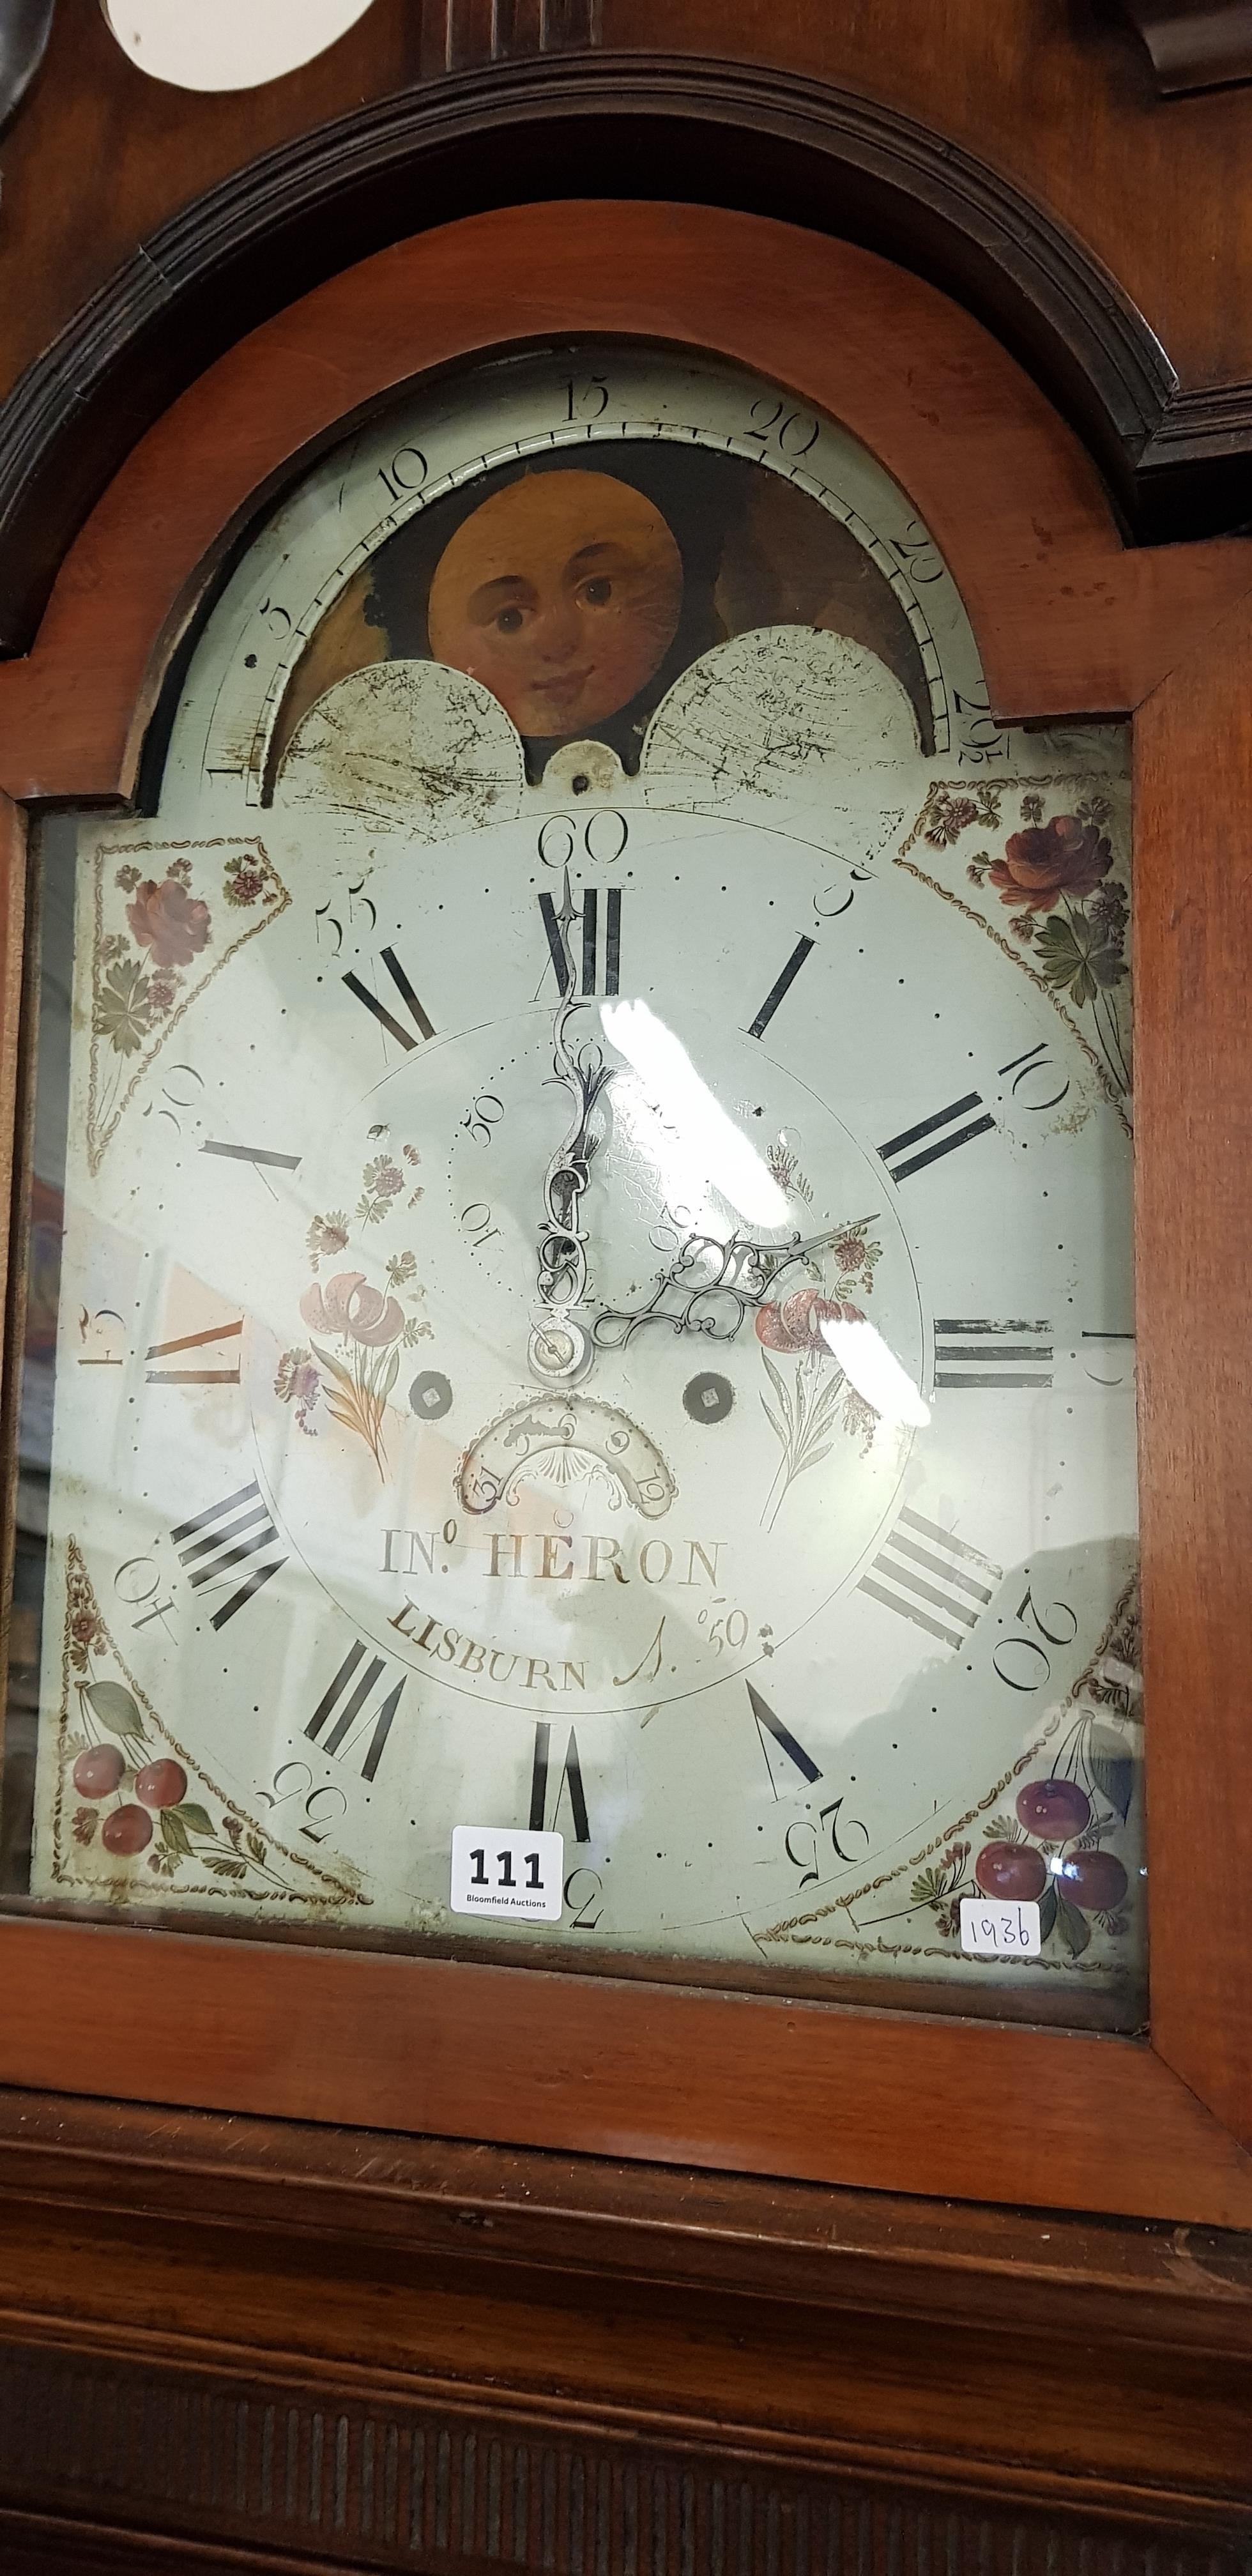 ANTIQUE MAHOGANY LONG CASED CLOCK WITH MOON DIAL- HERON, LISBURN - Image 4 of 4